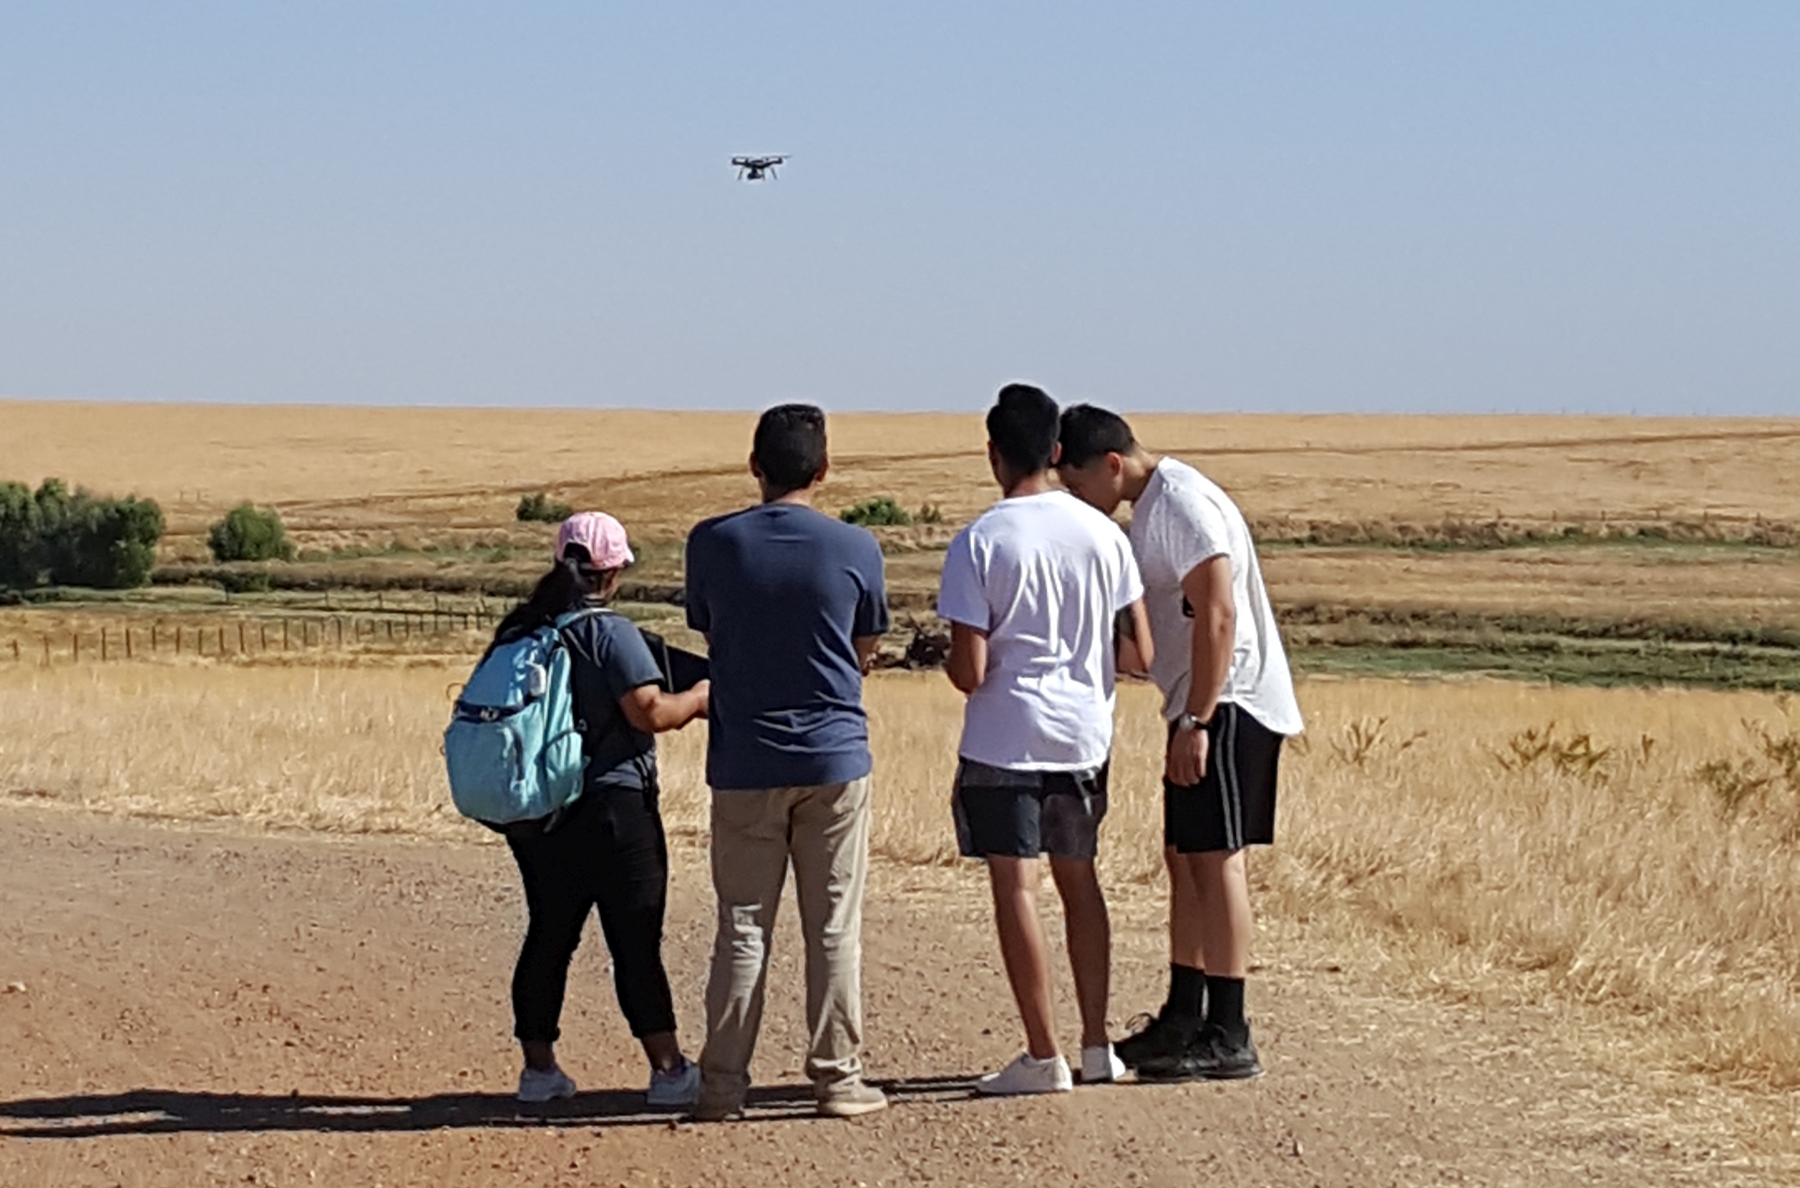 Students flying UC-owned UAS for coursework on a University Location